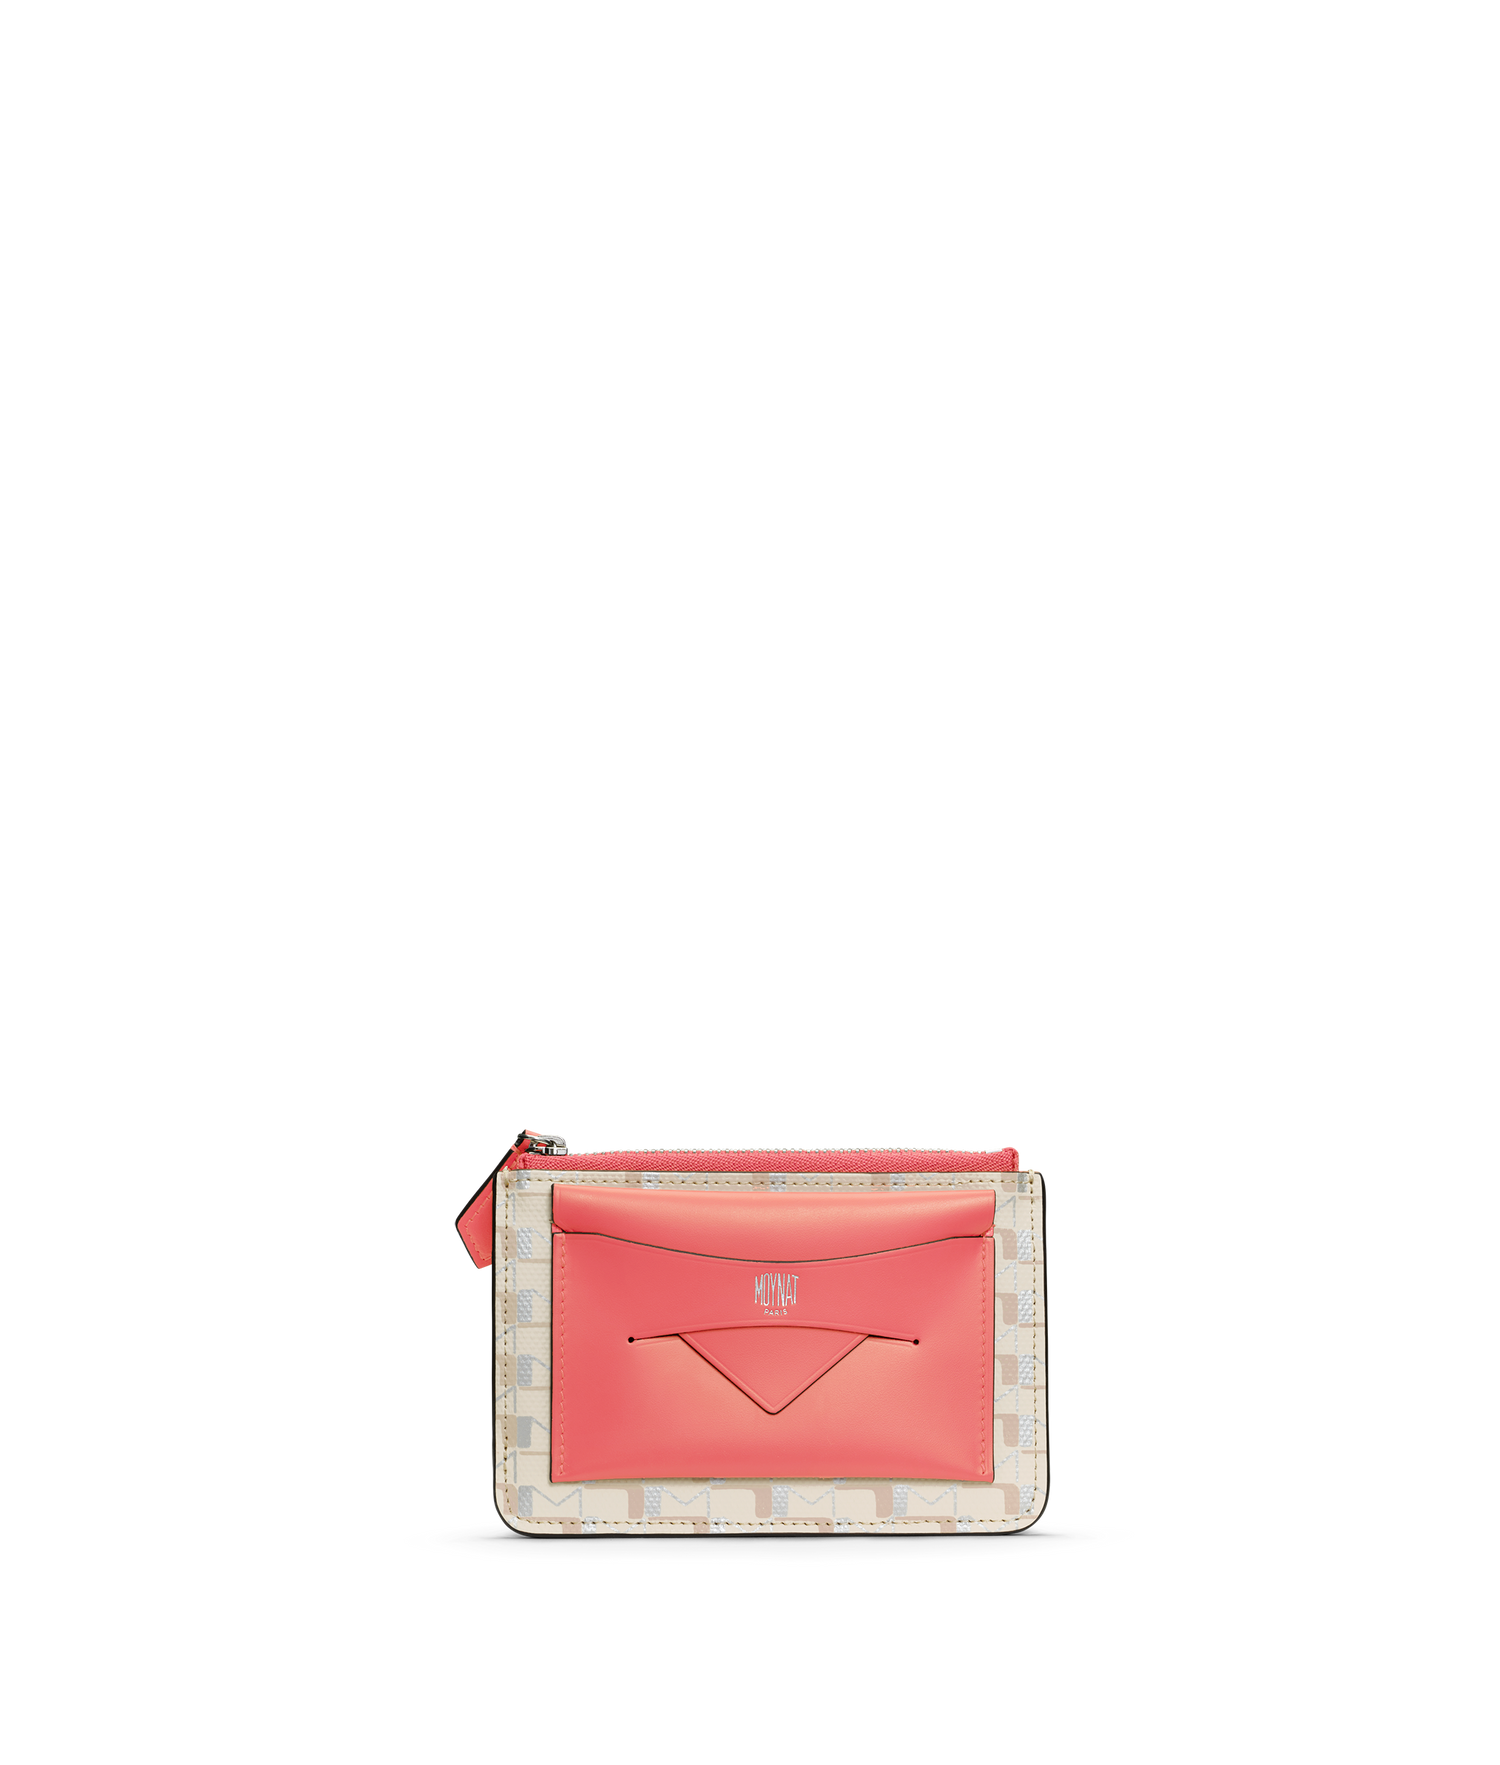 Moynat Oh! Trousse Pm Pouch in Red